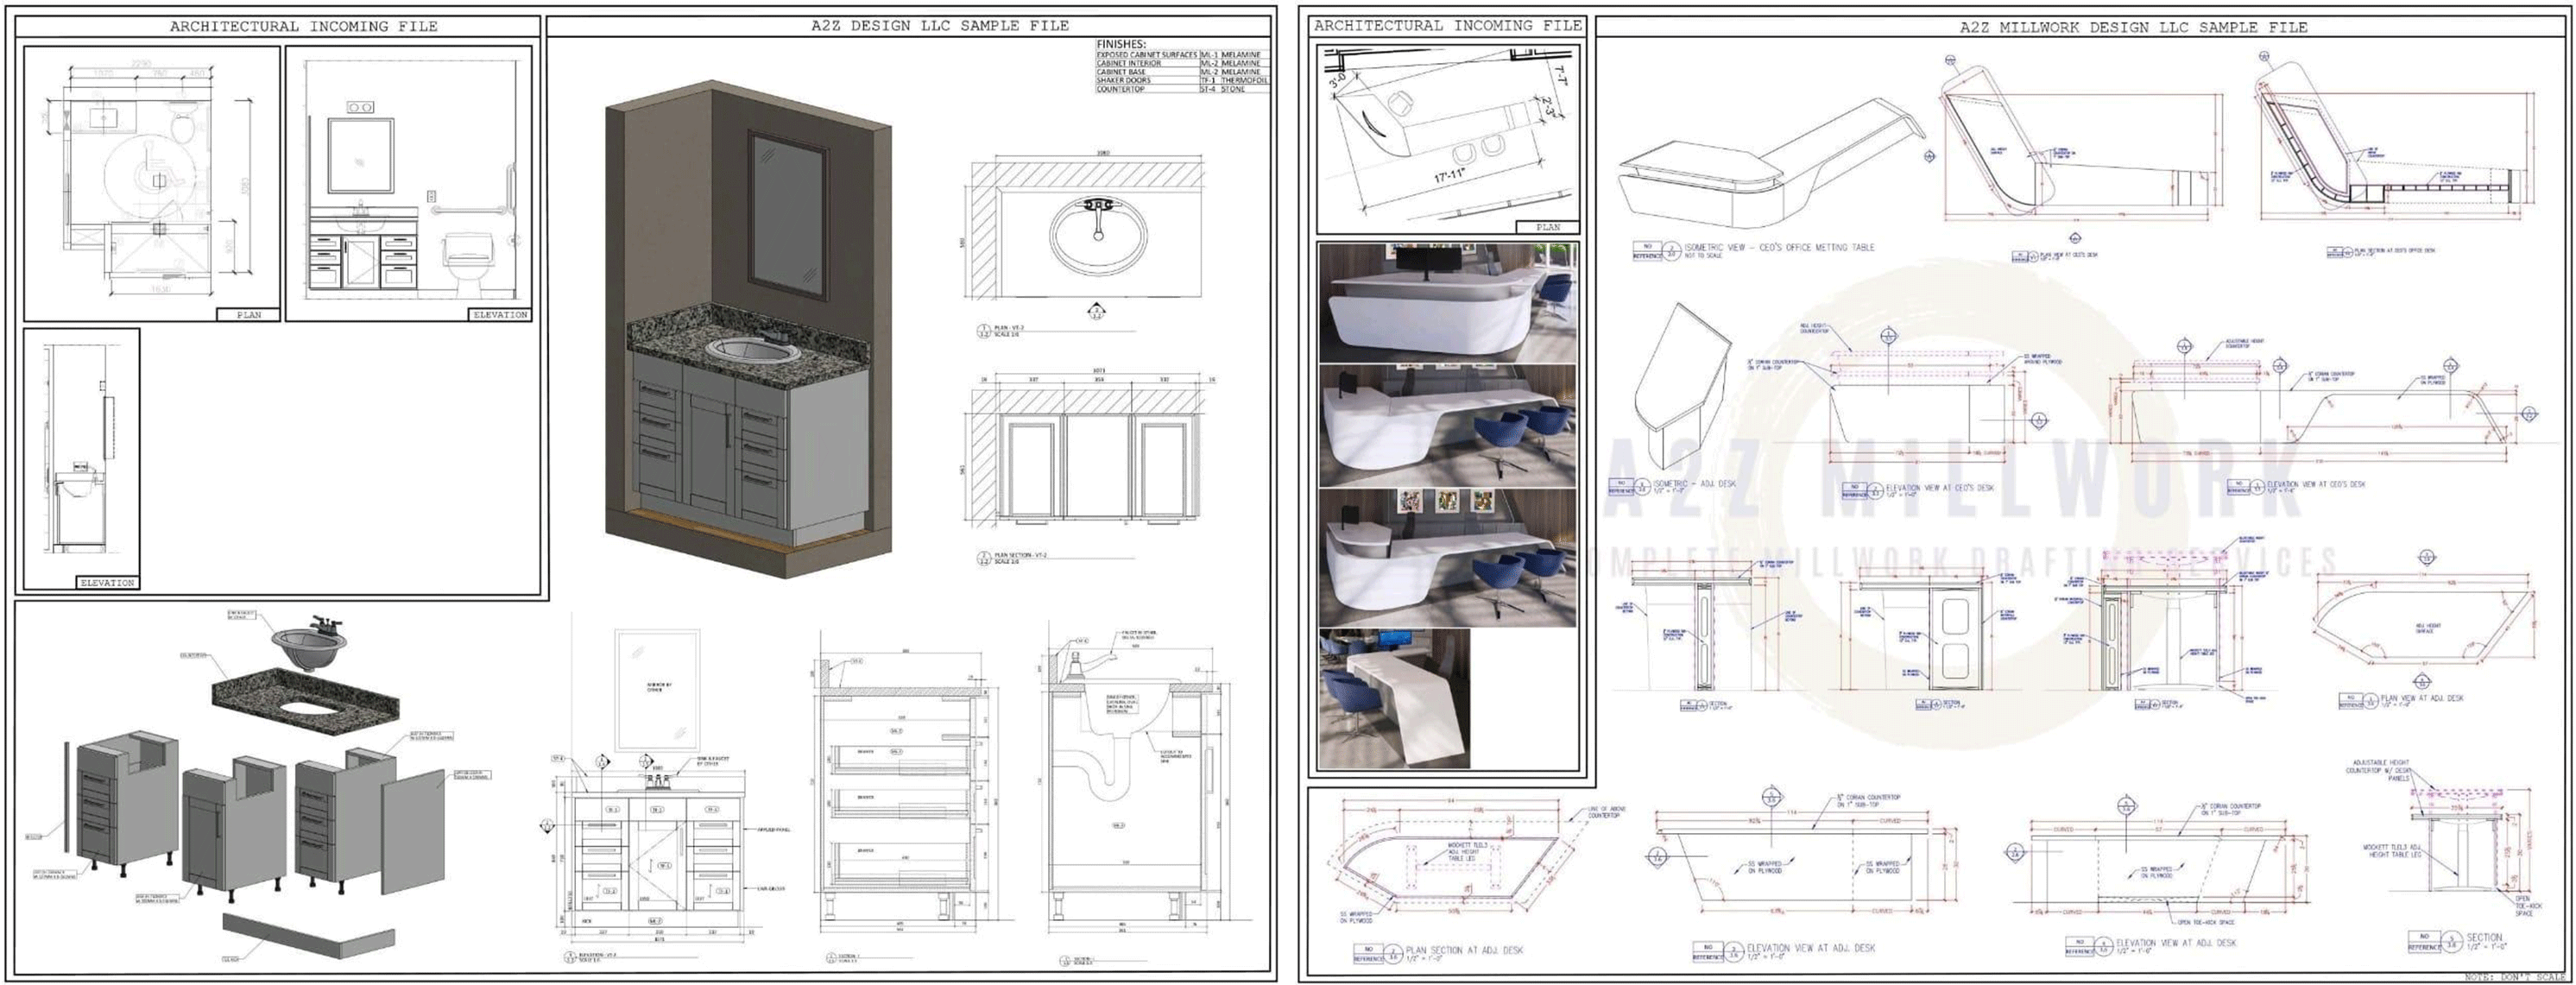 Millwork shop drawings dispose of any misinterpretations and empower precise and convenient creation and establishment of custom cupboards, casework, entryways, and other wood items.